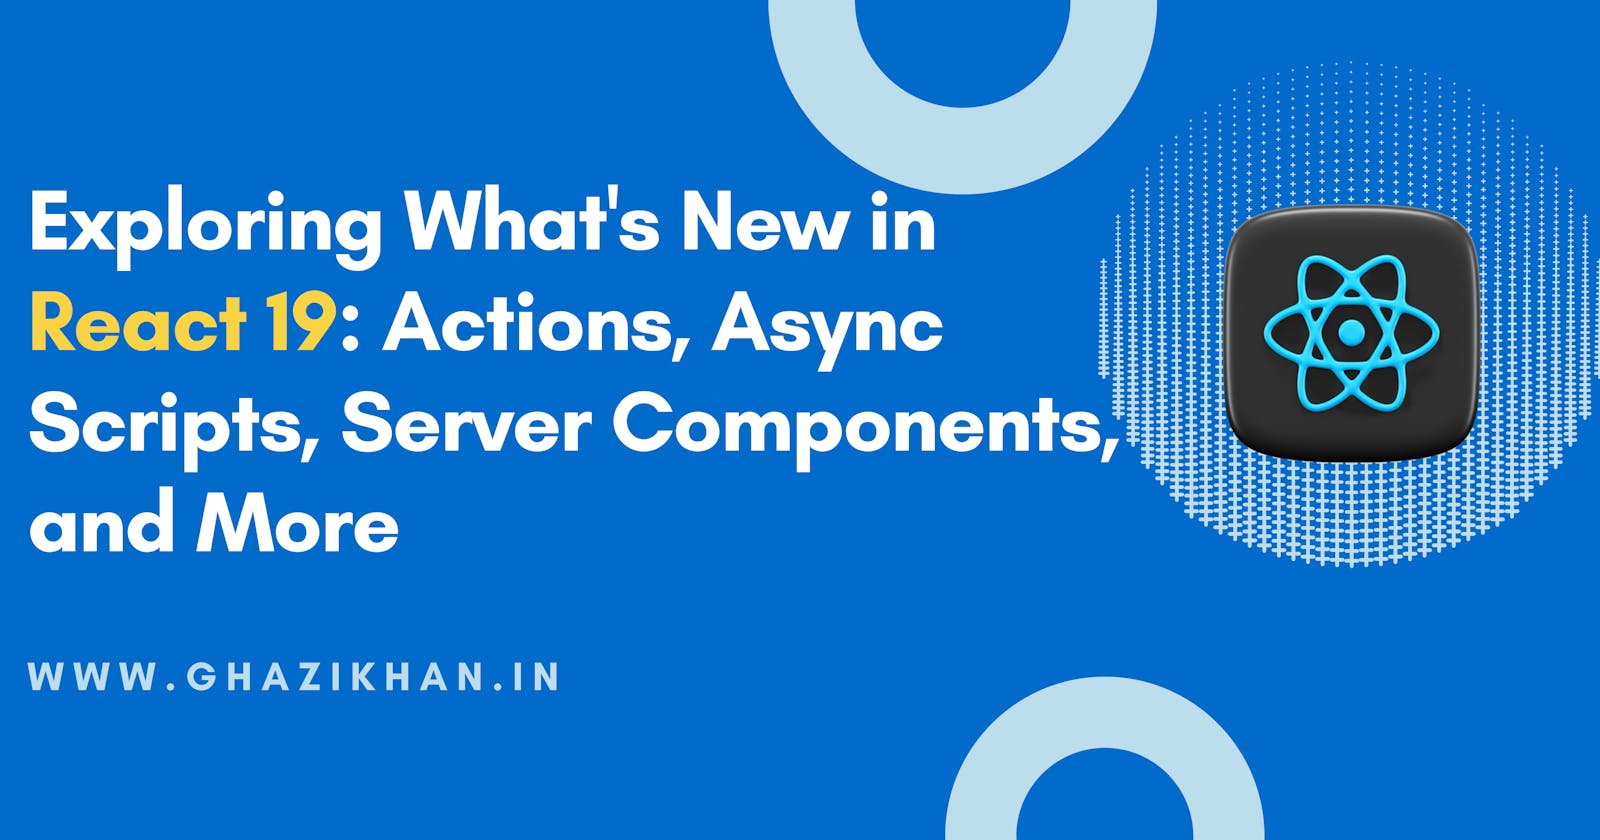 Exploring What’s New in React 19: Actions, Async Scripts, Server Components, and More